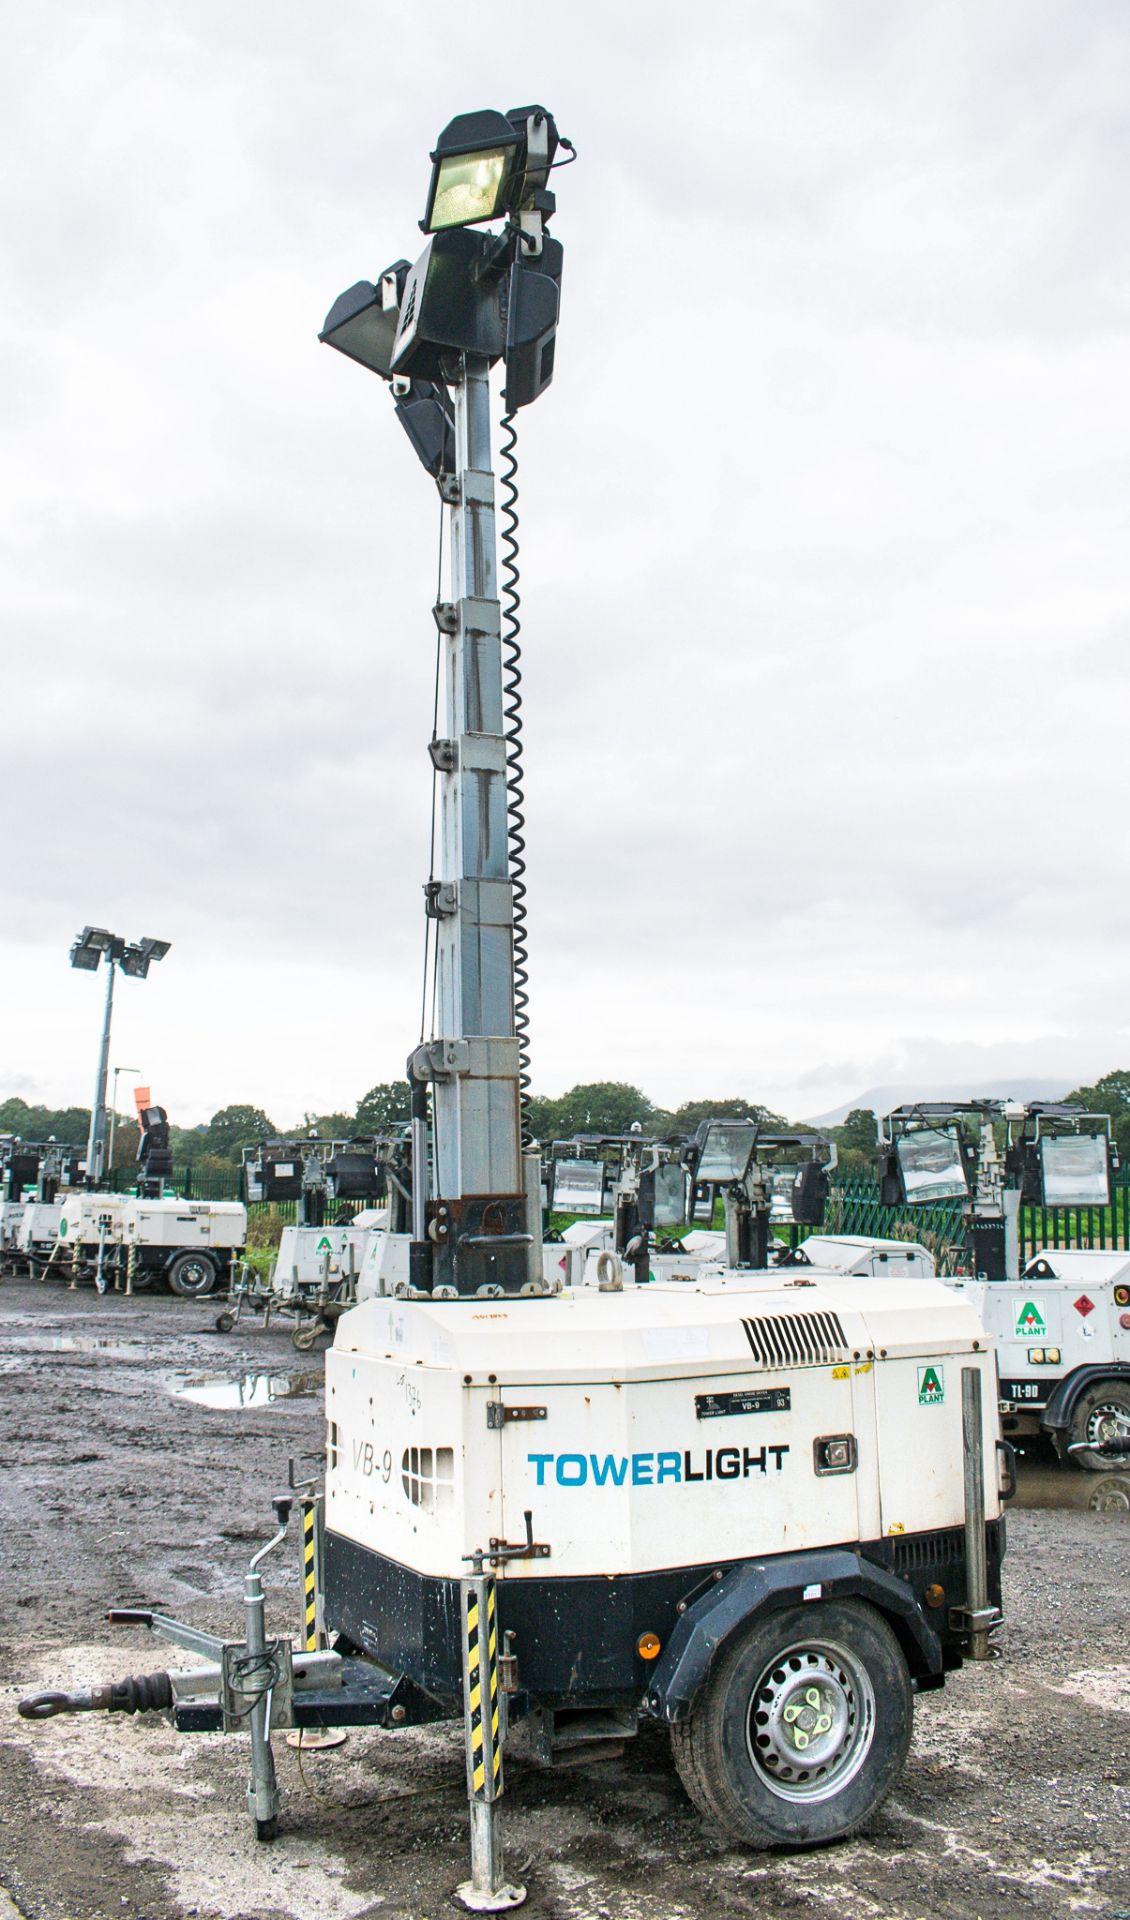 Tower Light VB-9 diesel driven mobile lighting tower Year: 2012 S/N: 1204667 Recorded Hours: 2947 - Image 6 of 9